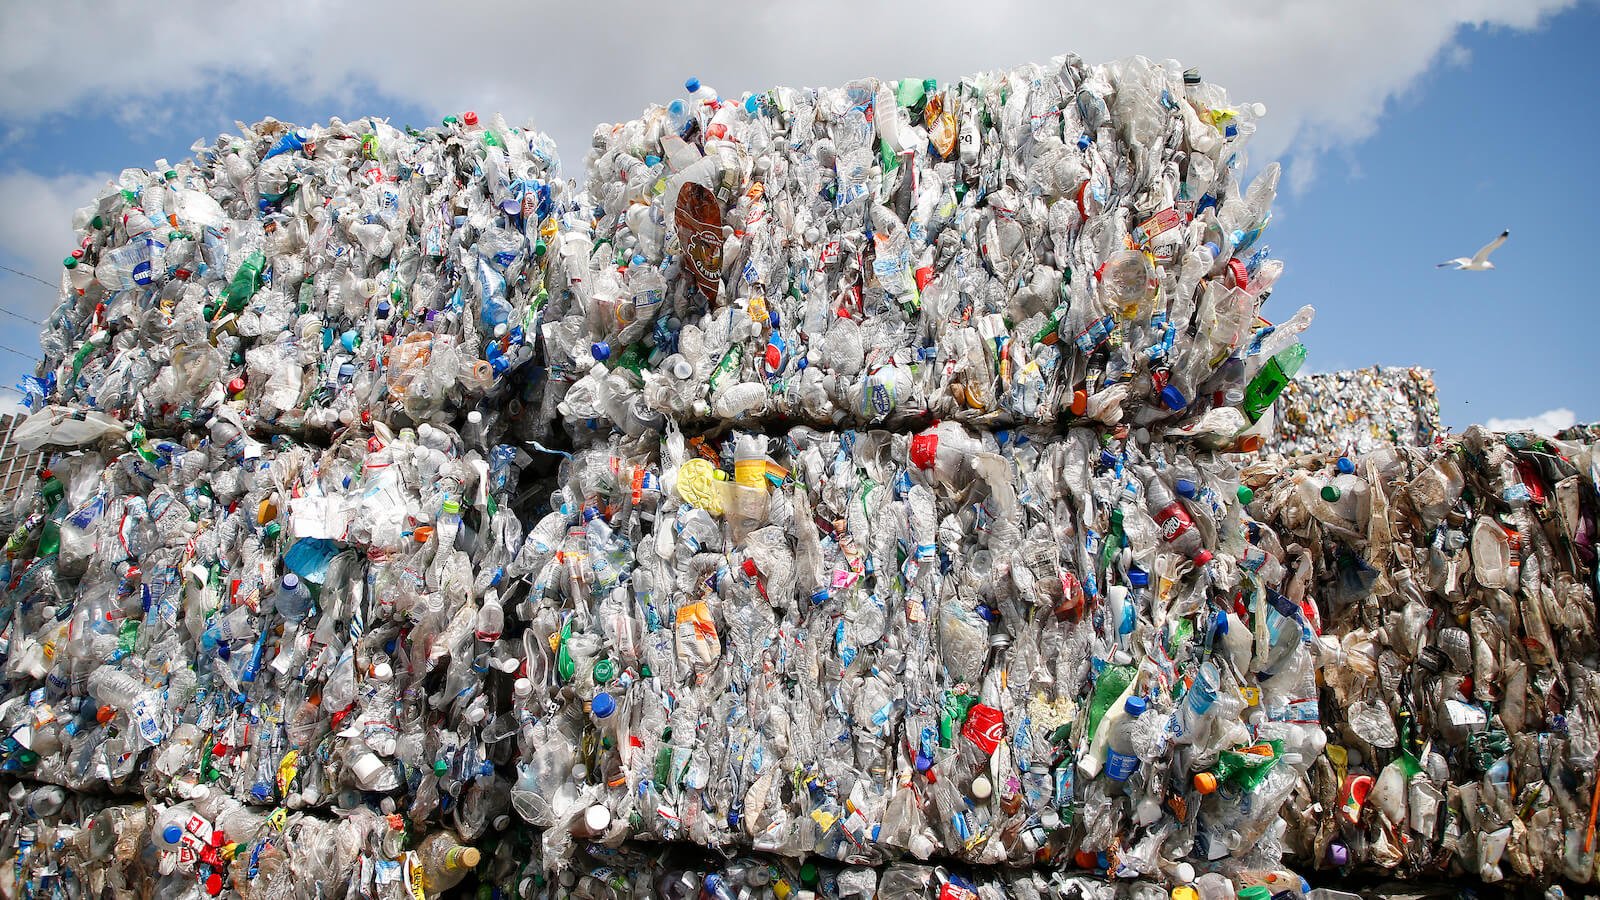 California wants to ban misleading recycling labels. Plastic companies don't.